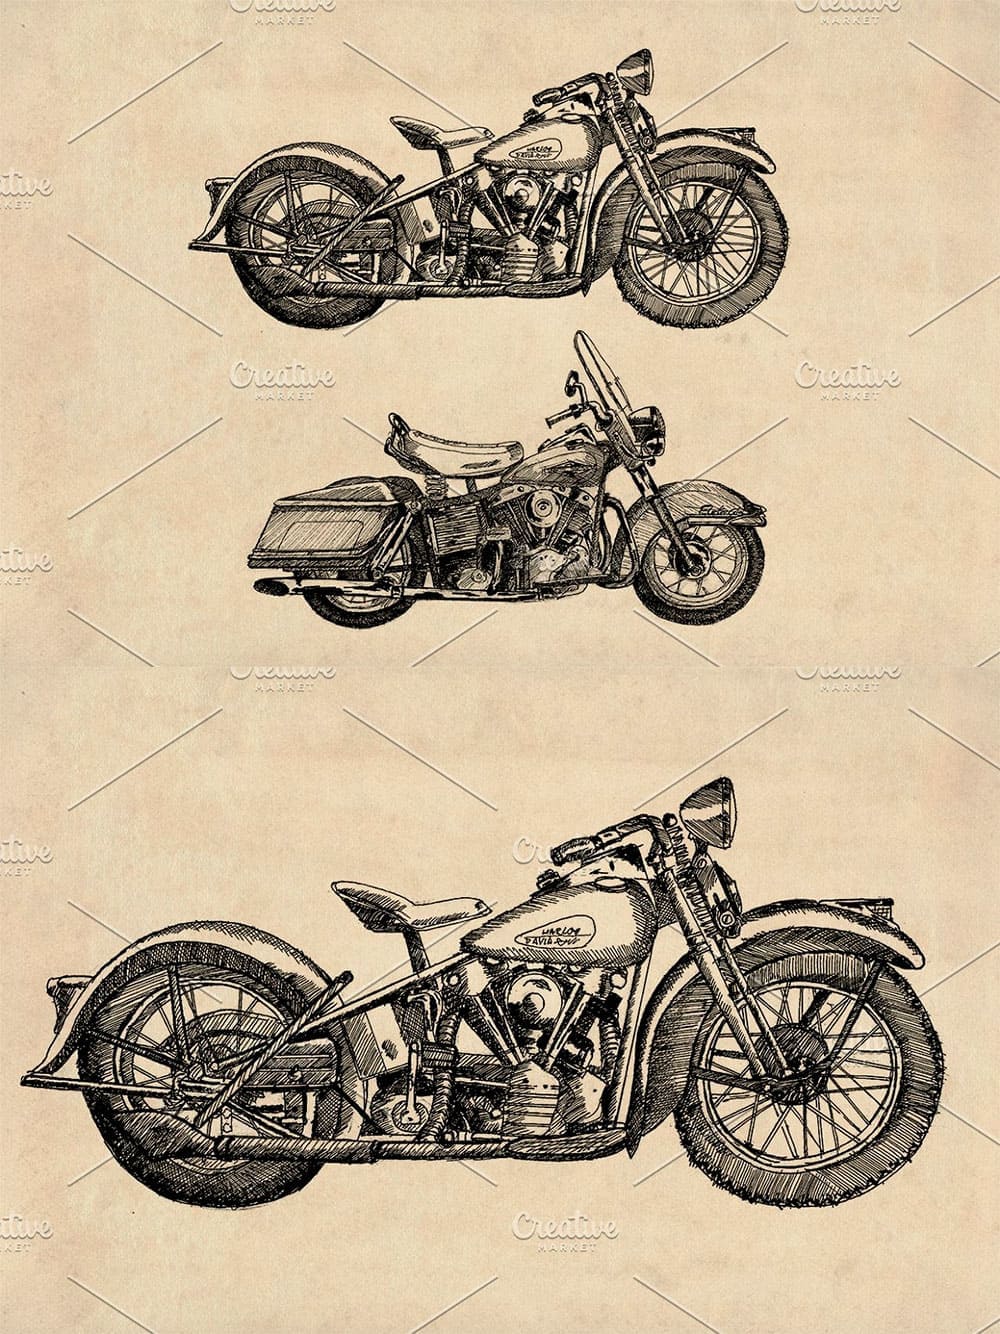 American classic motorcycles, picture for pinterest.